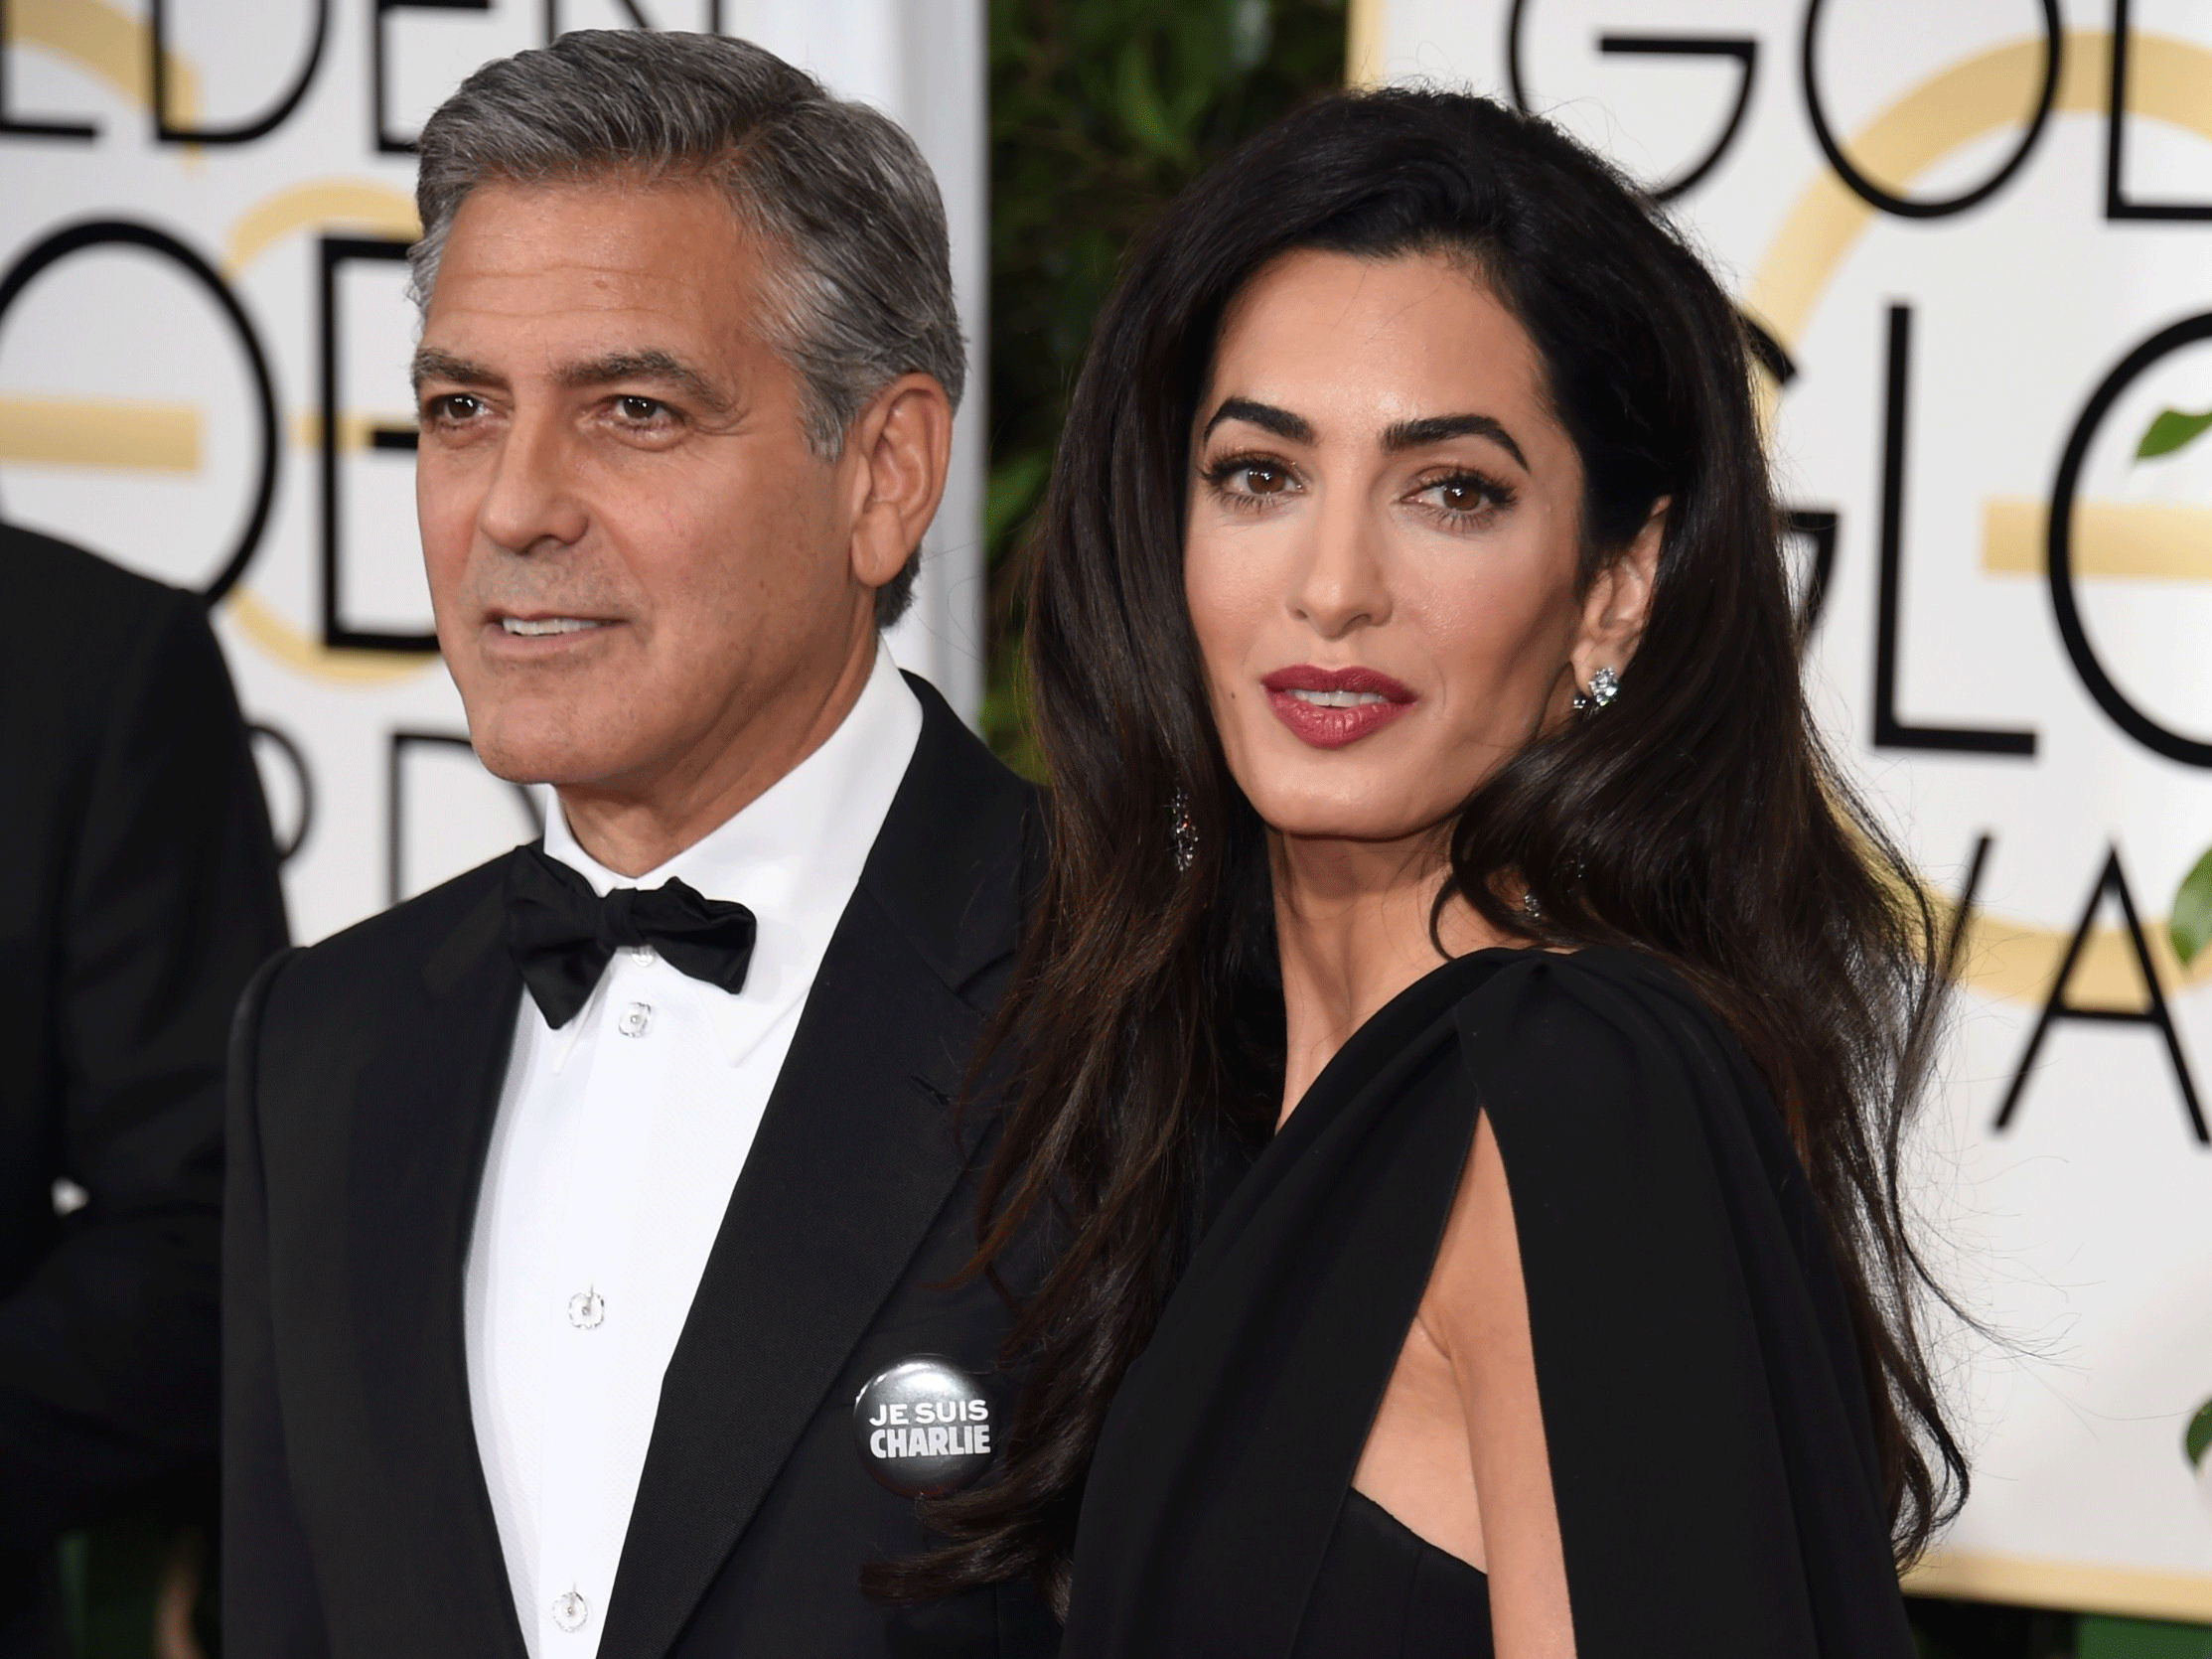 George Clooney wearing a 'Je suis Charlie' badge with his wife, Amal (Getty)